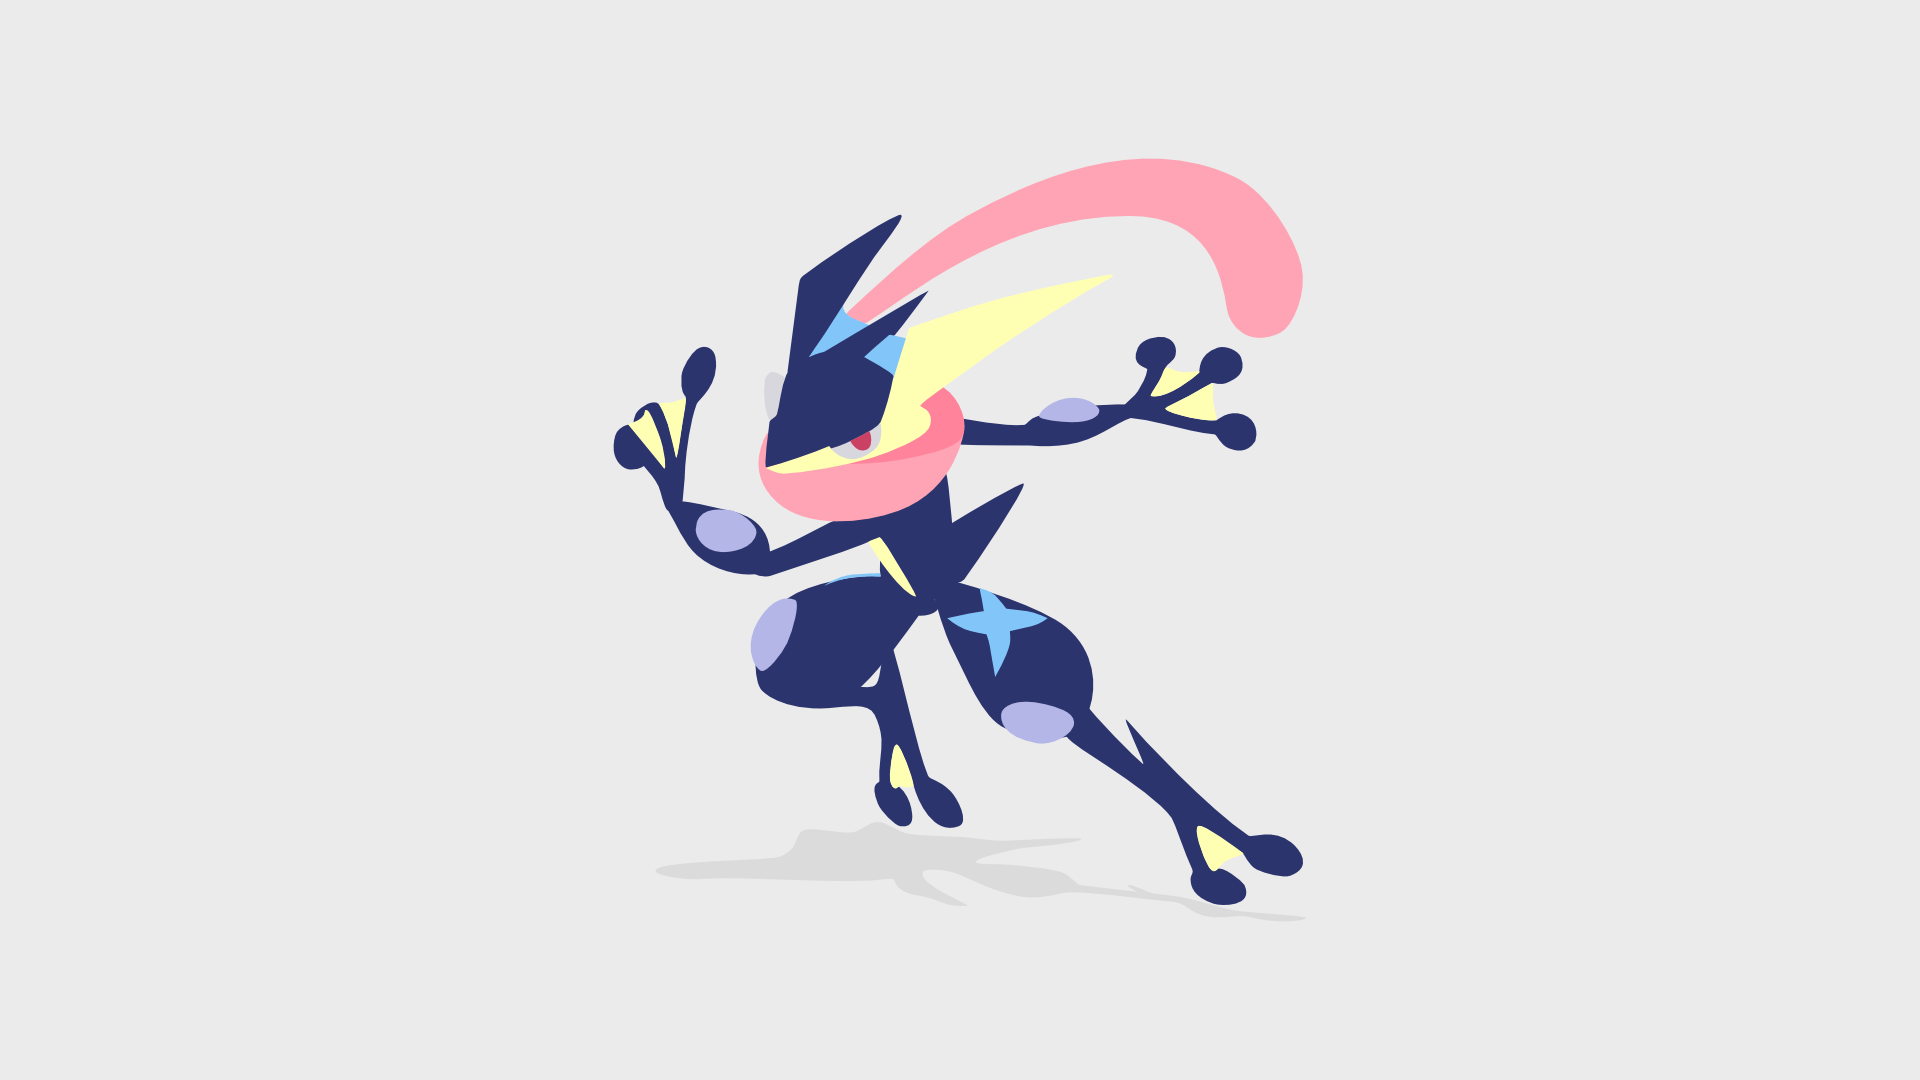 OC I'm practising vector drawing and made greninja